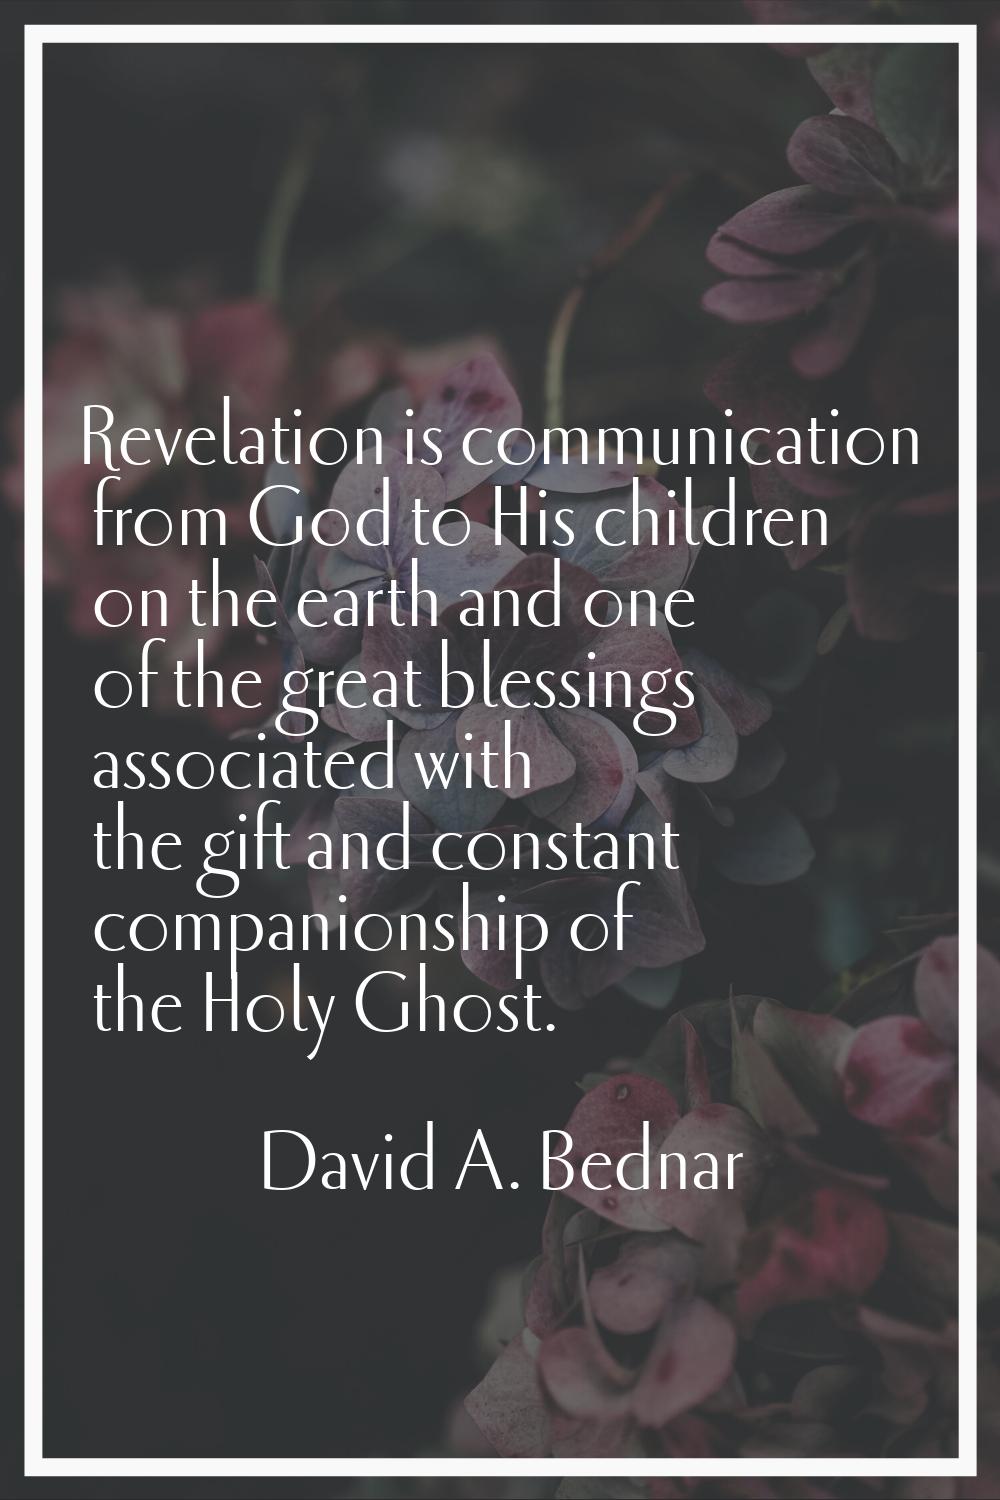 Revelation is communication from God to His children on the earth and one of the great blessings as